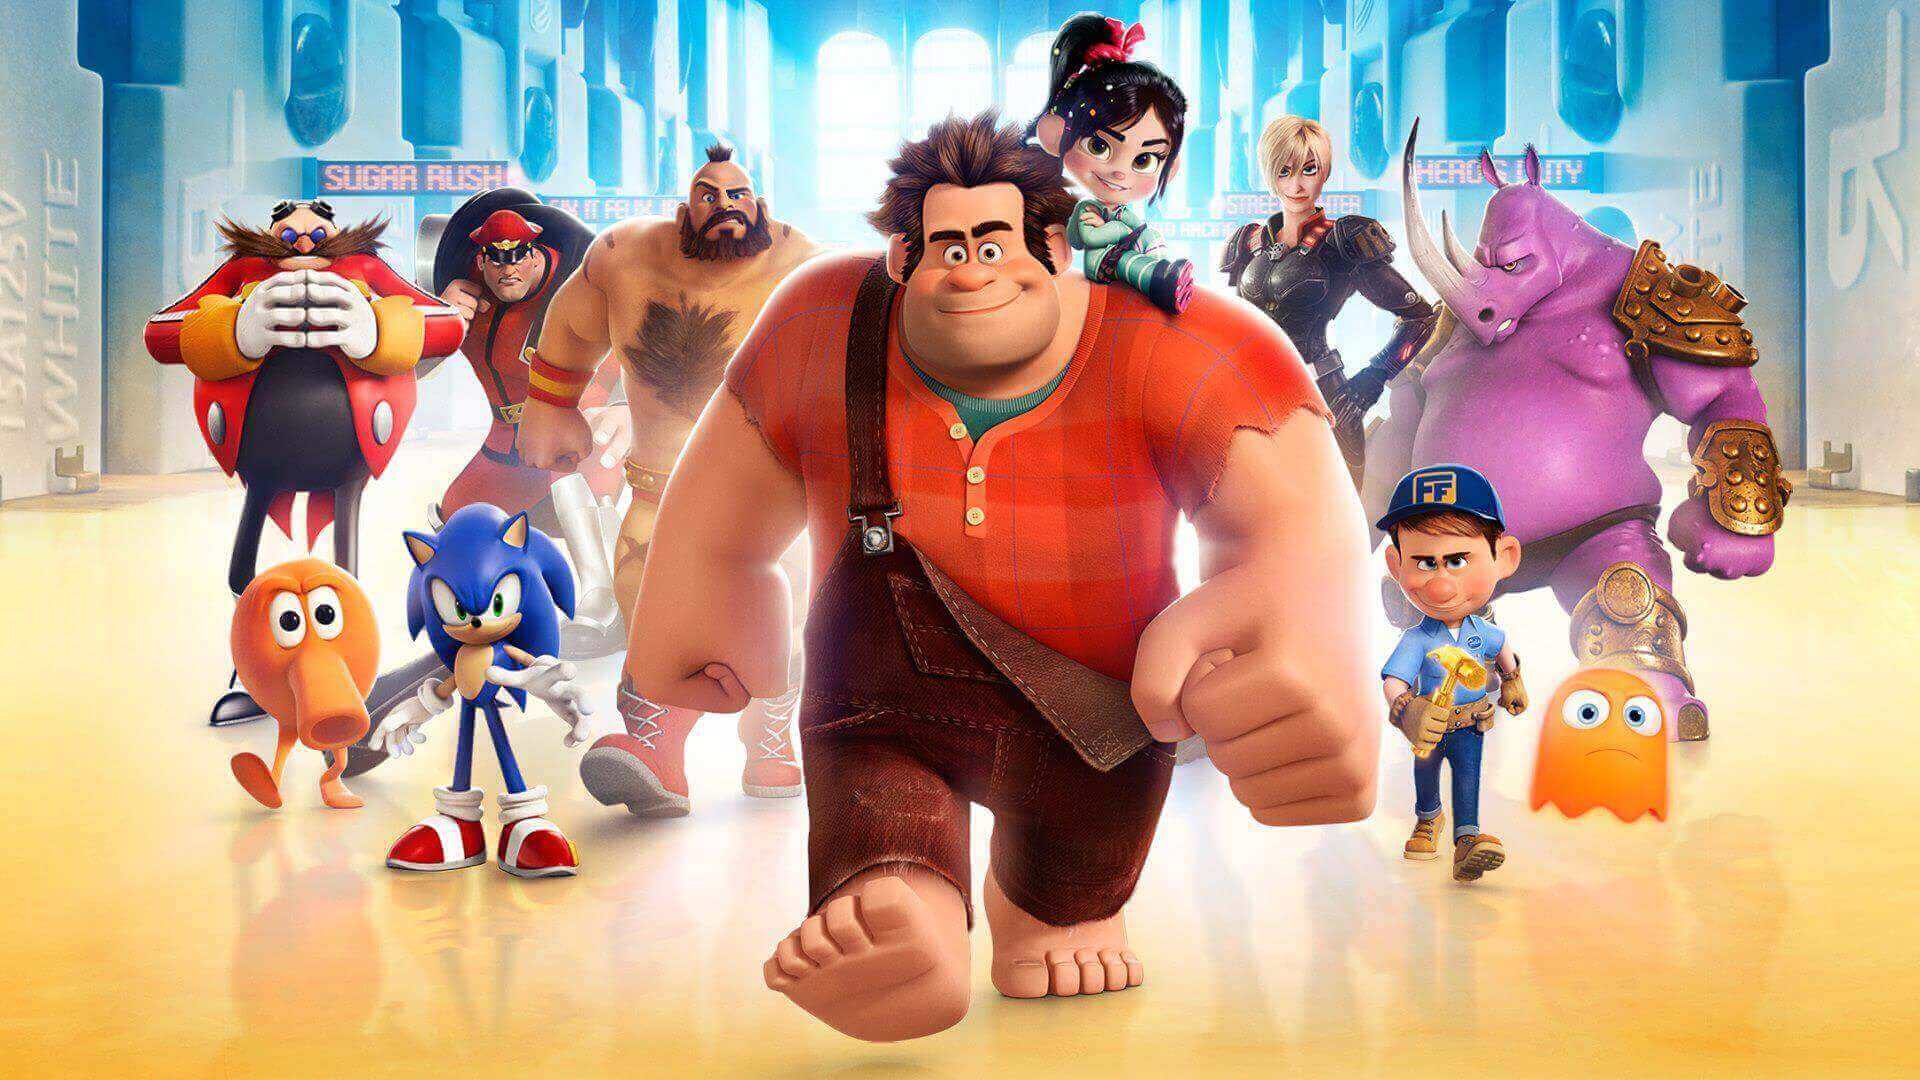 wreck it ralph 2 ralph breaks the internet ending explained story recap and post credits scene